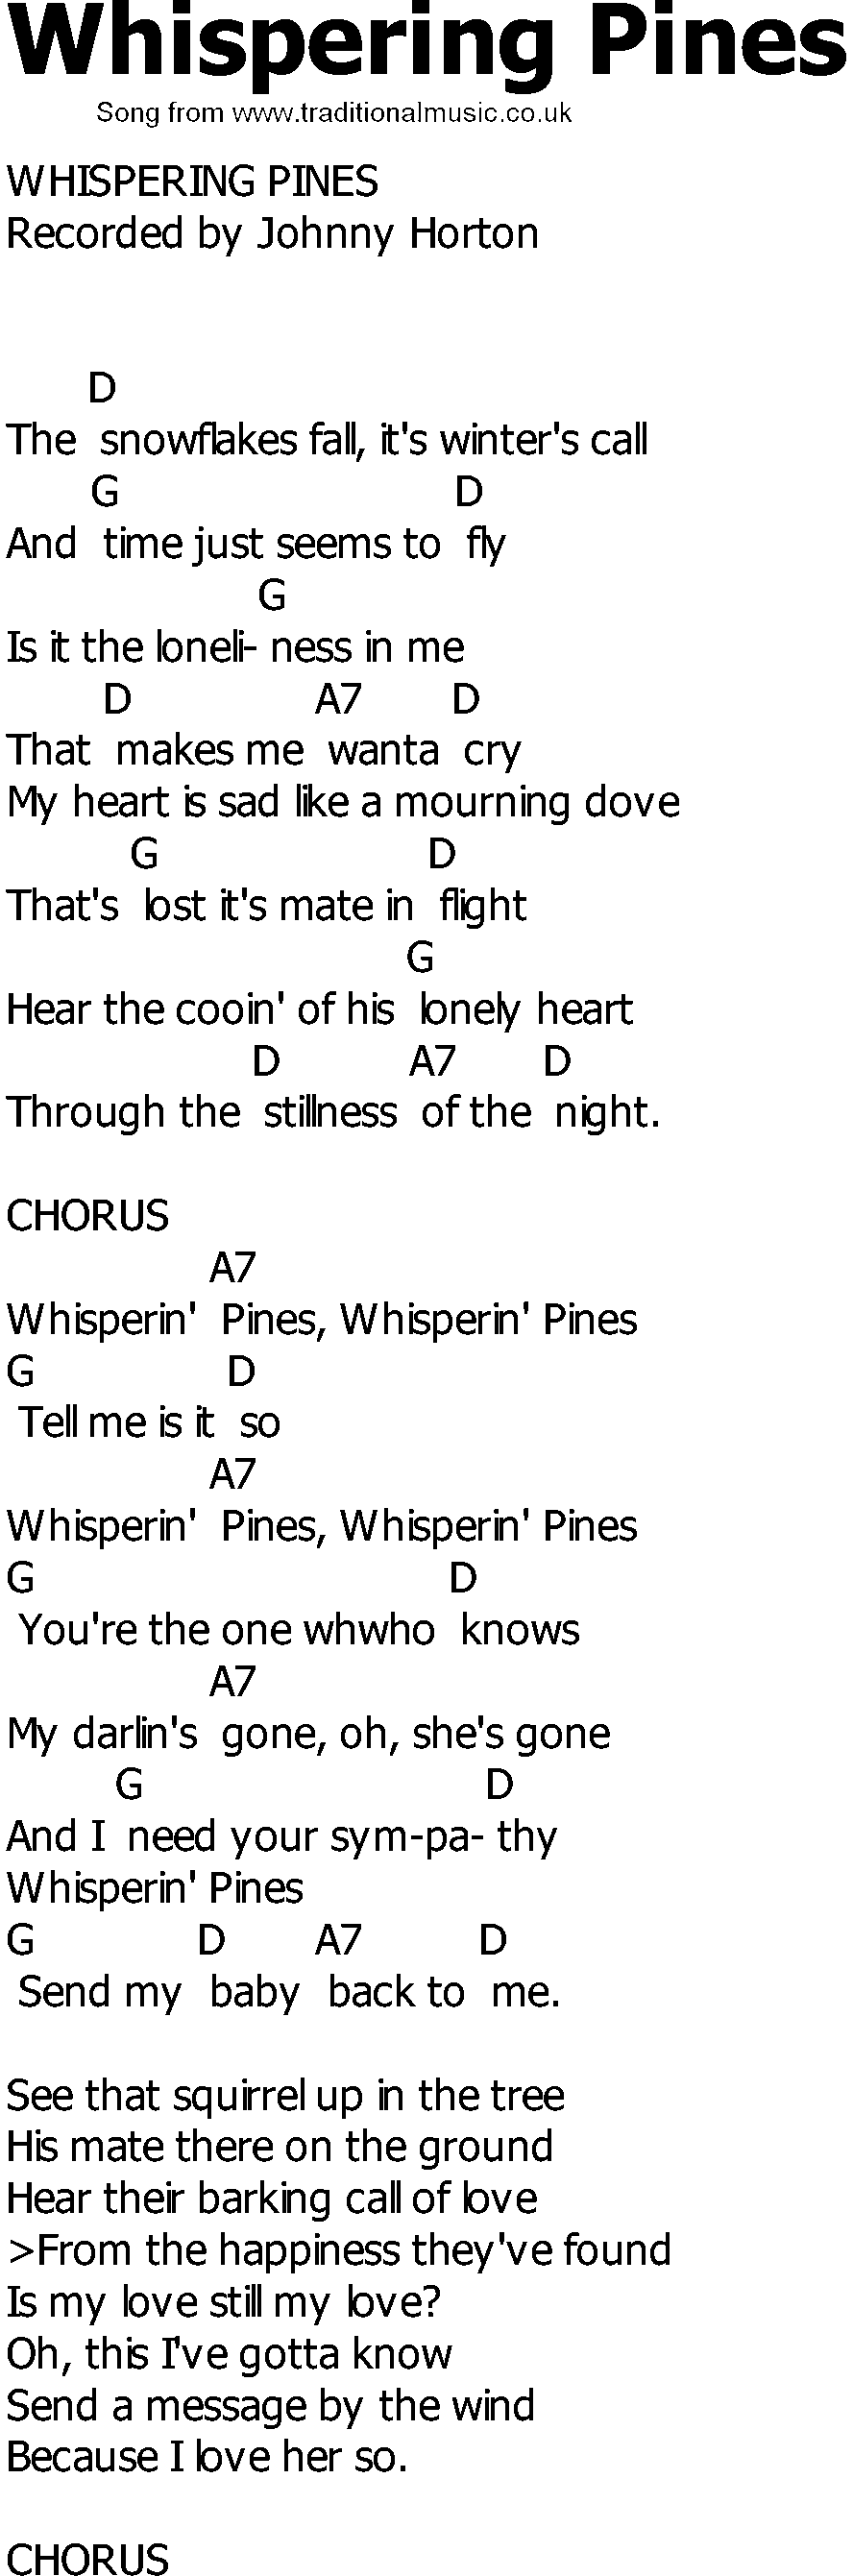 Old Country song lyrics with chords - Whispering Pines